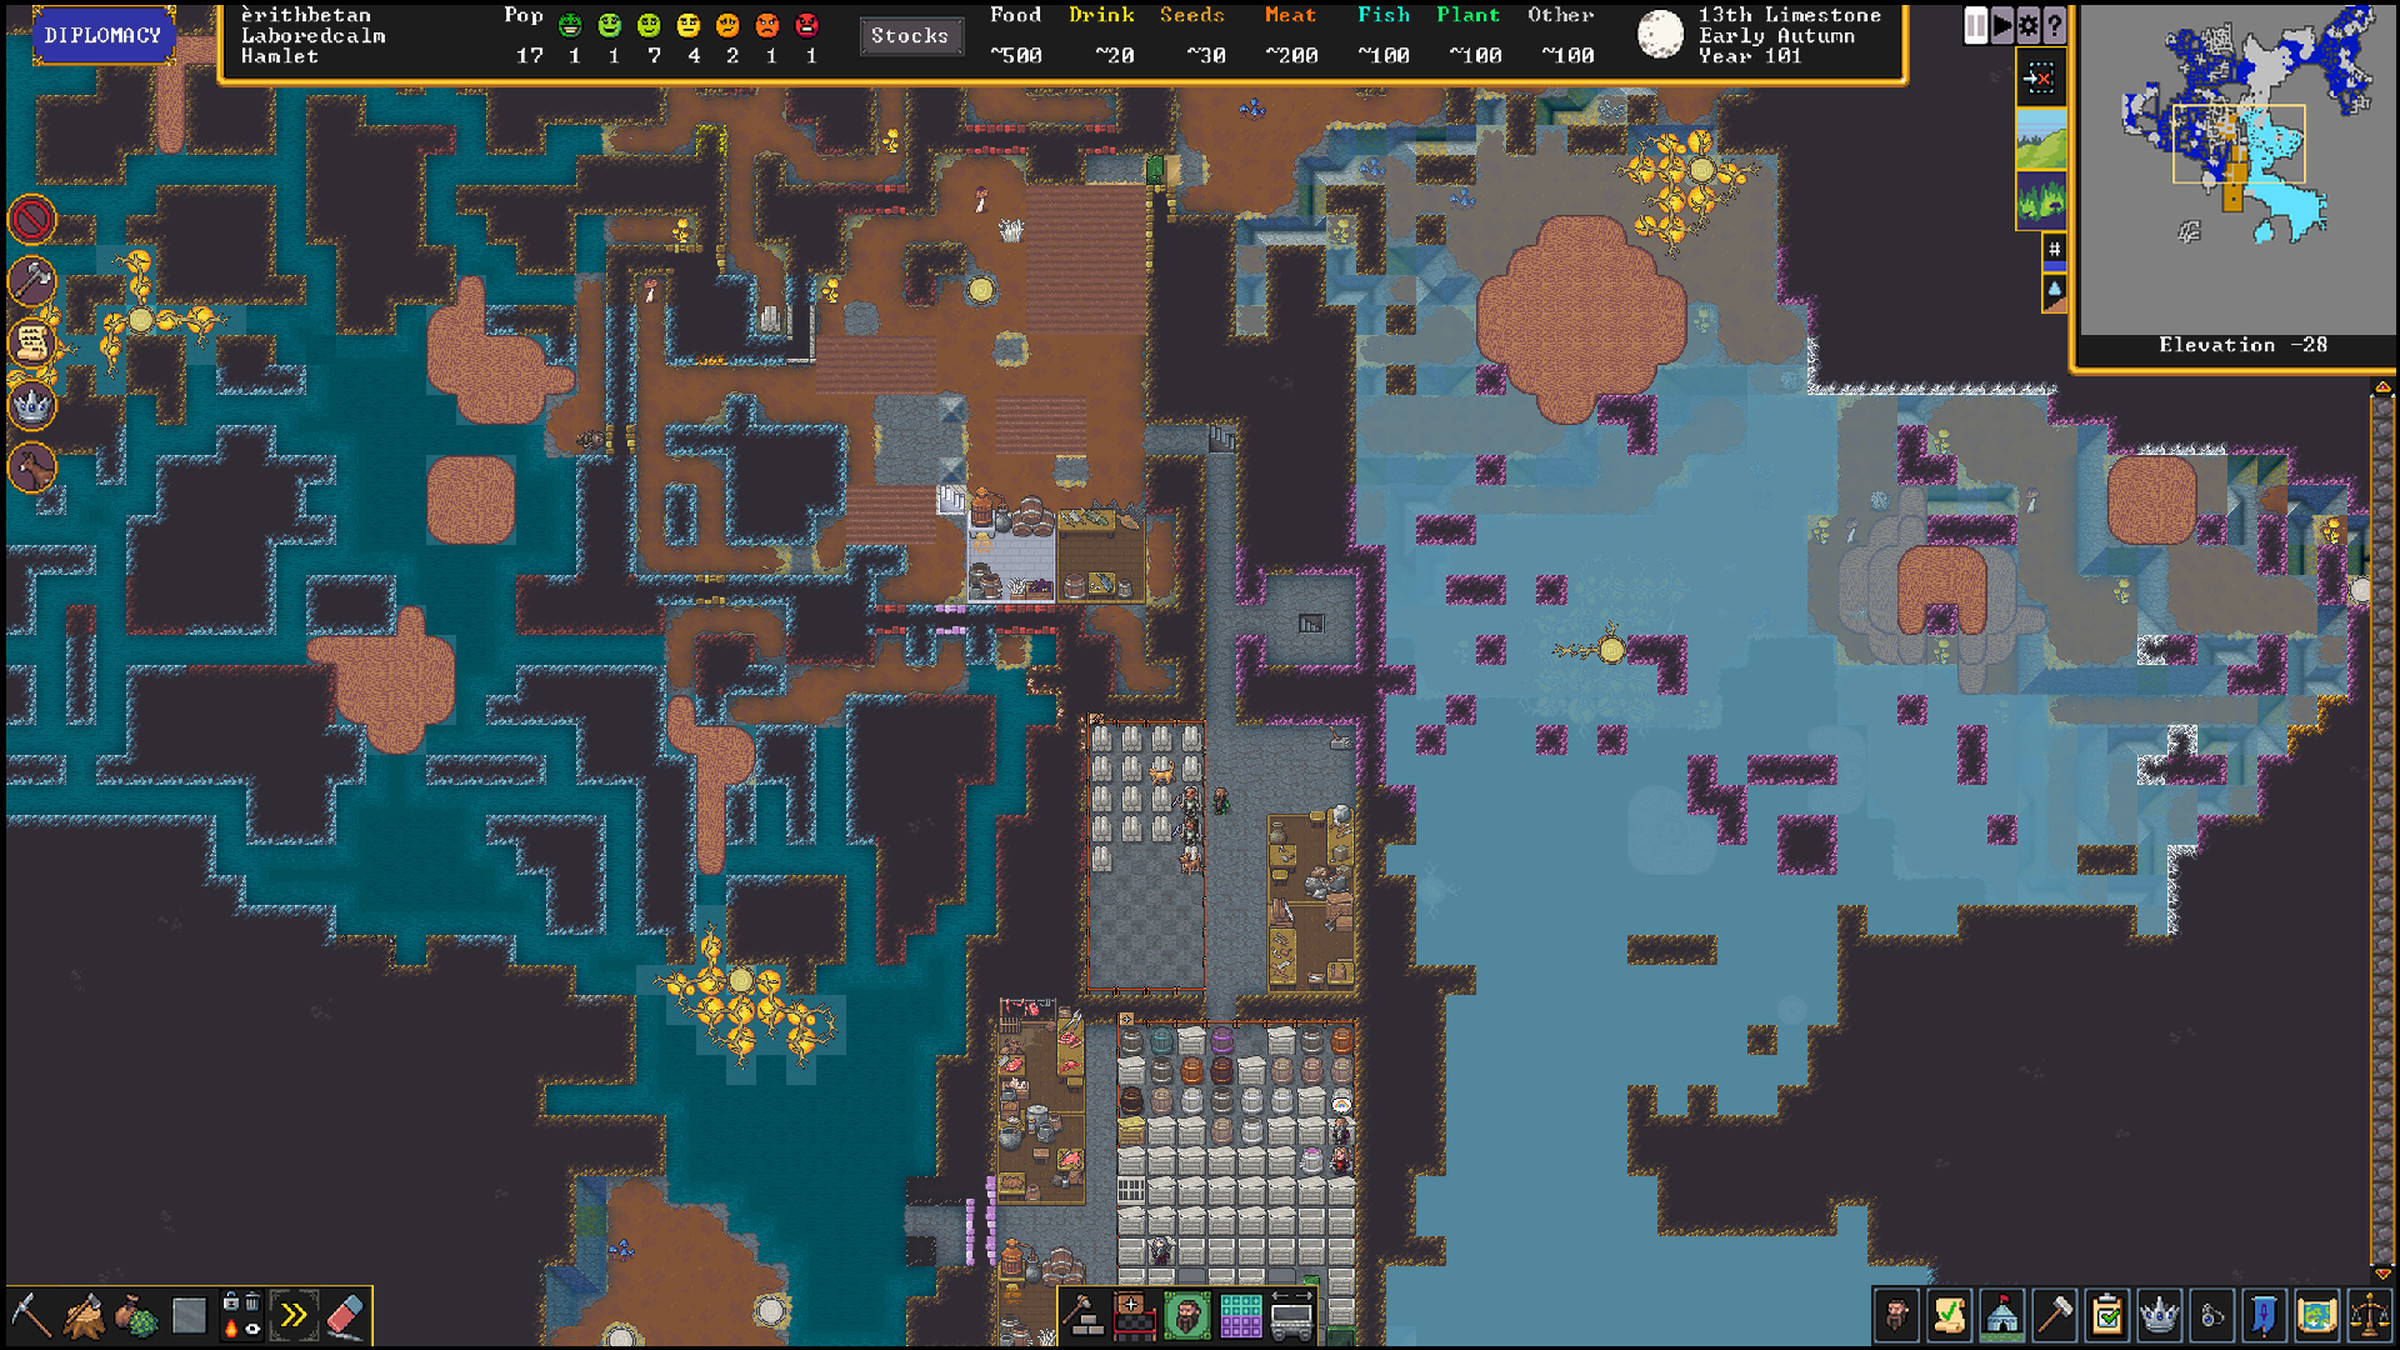 A screenshot of the newest version of Dwarf Fortress.